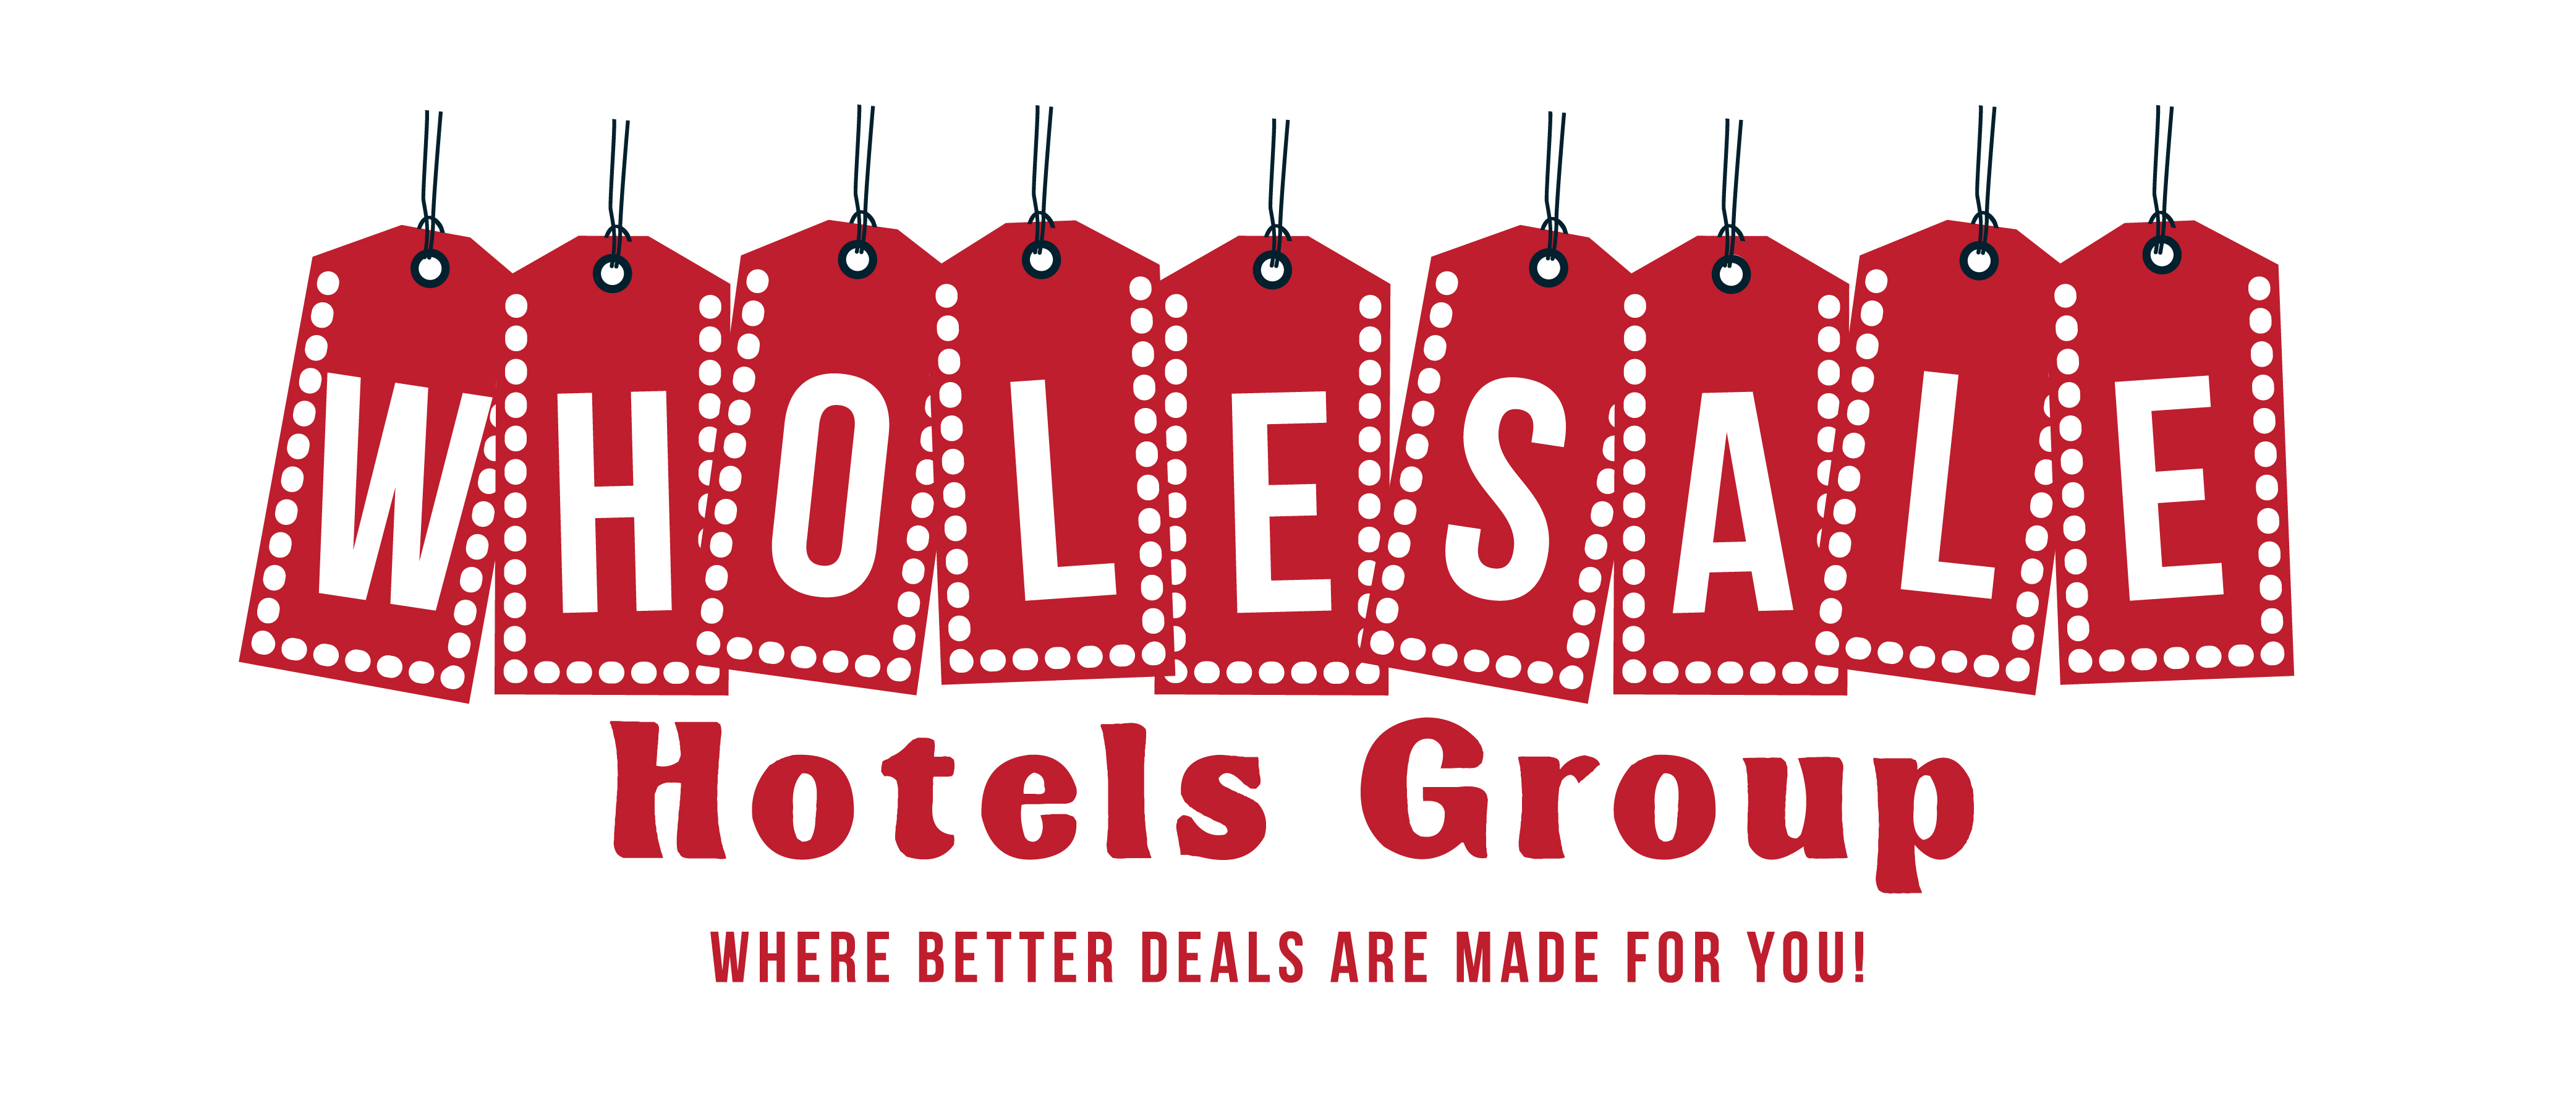 Wholesale Hotels Group - The BEST wholesale hotel booking site!